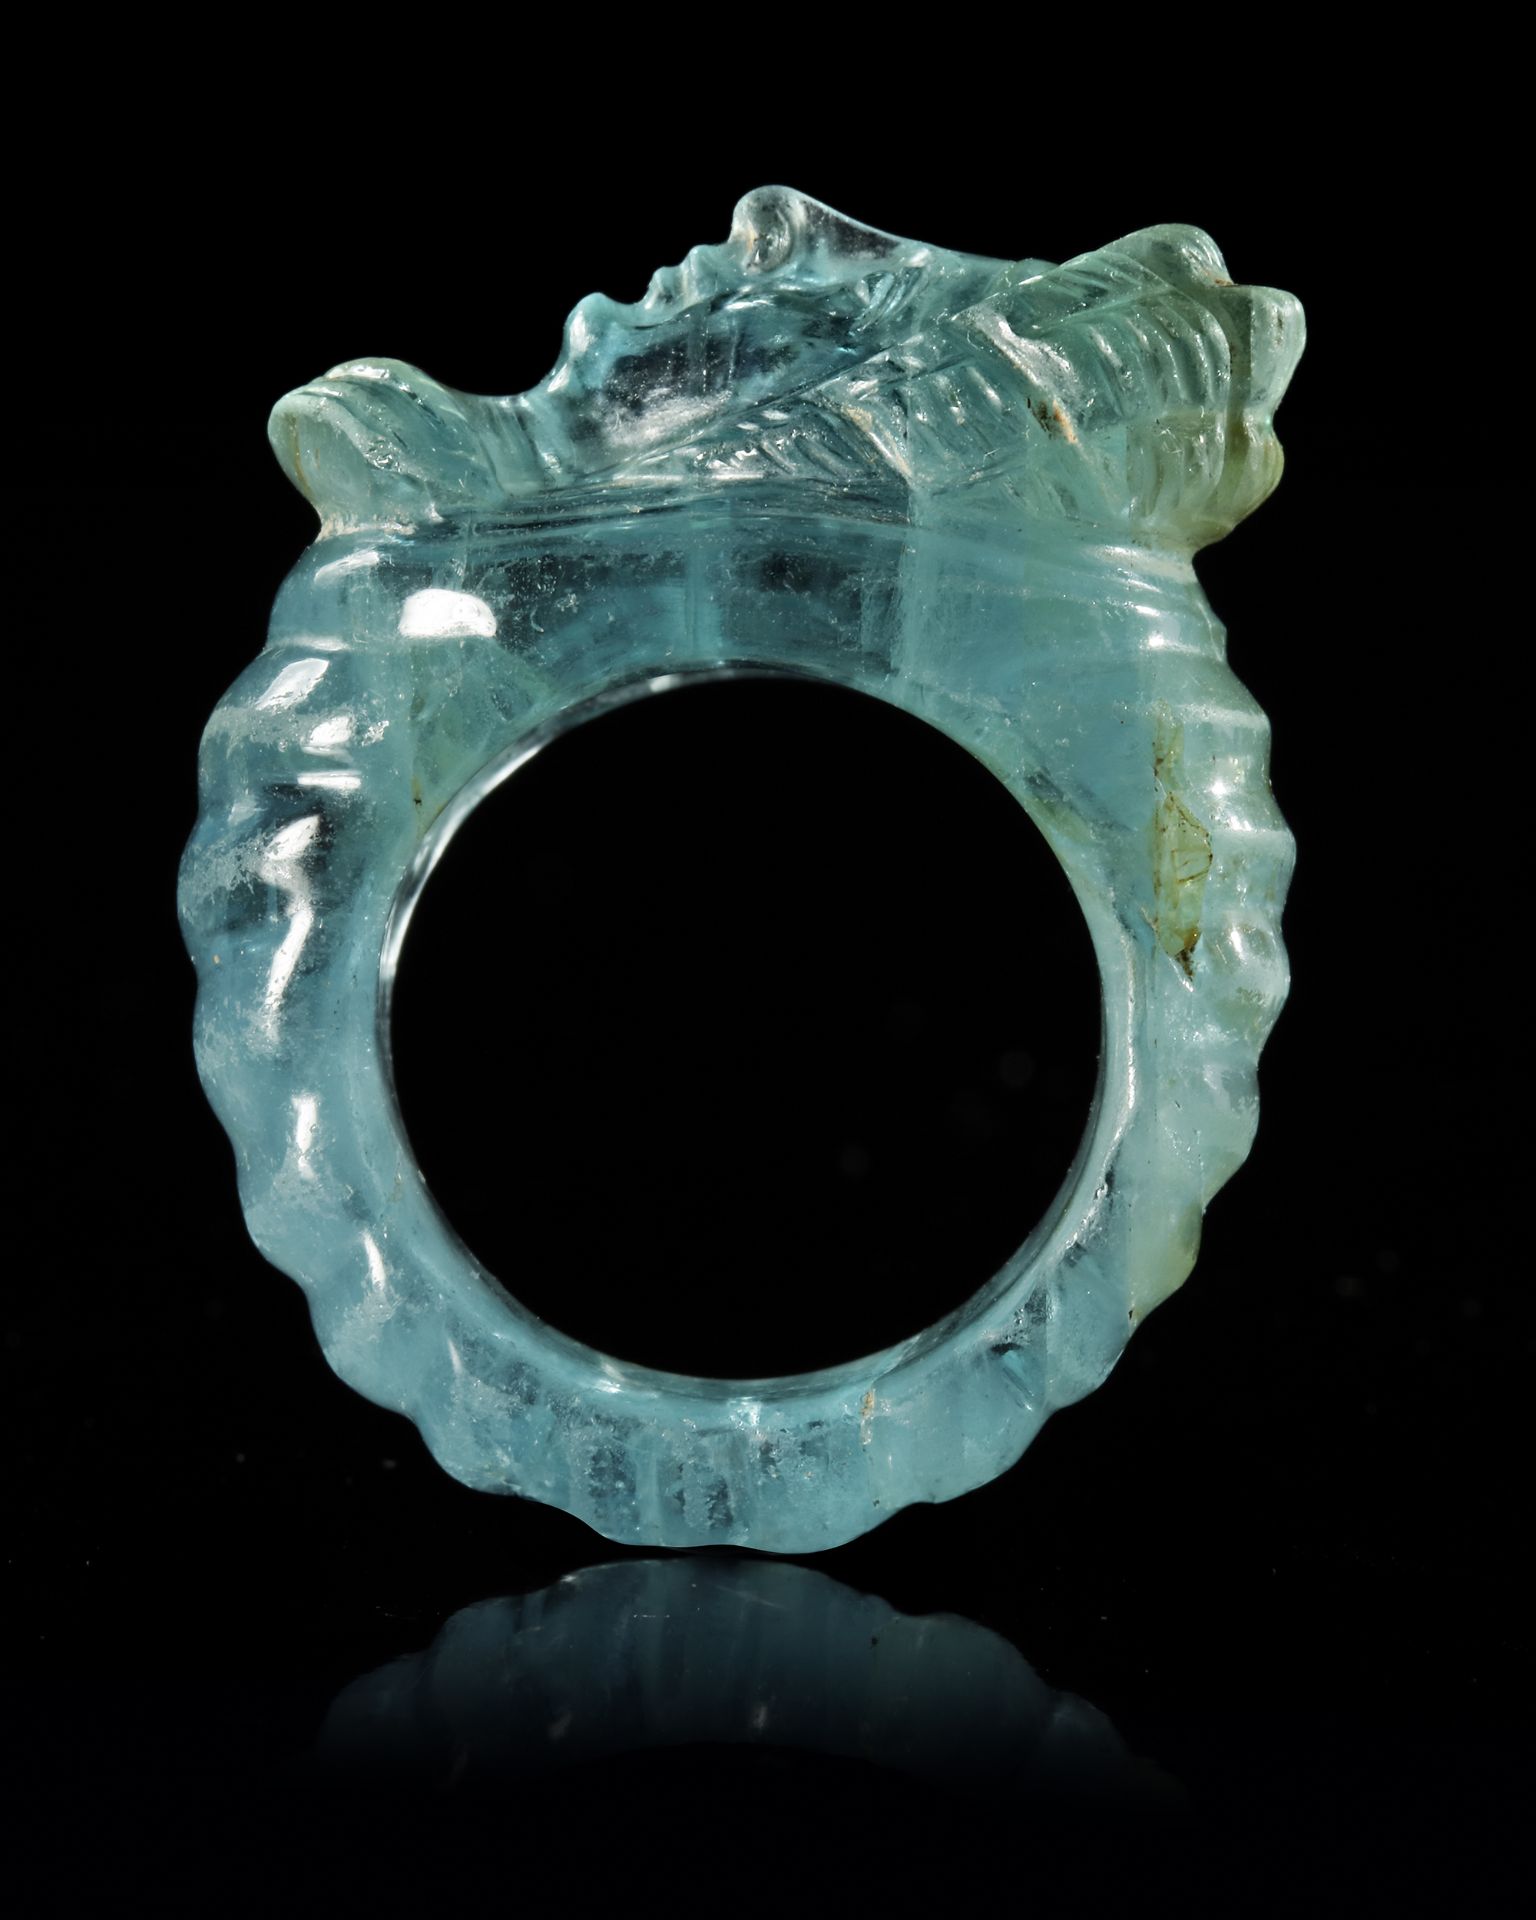 A HIGHLY IMPORTANT ROMAN RING IN AQUAMARINE, 2ND CENTURY AD OR LATER - Image 3 of 4